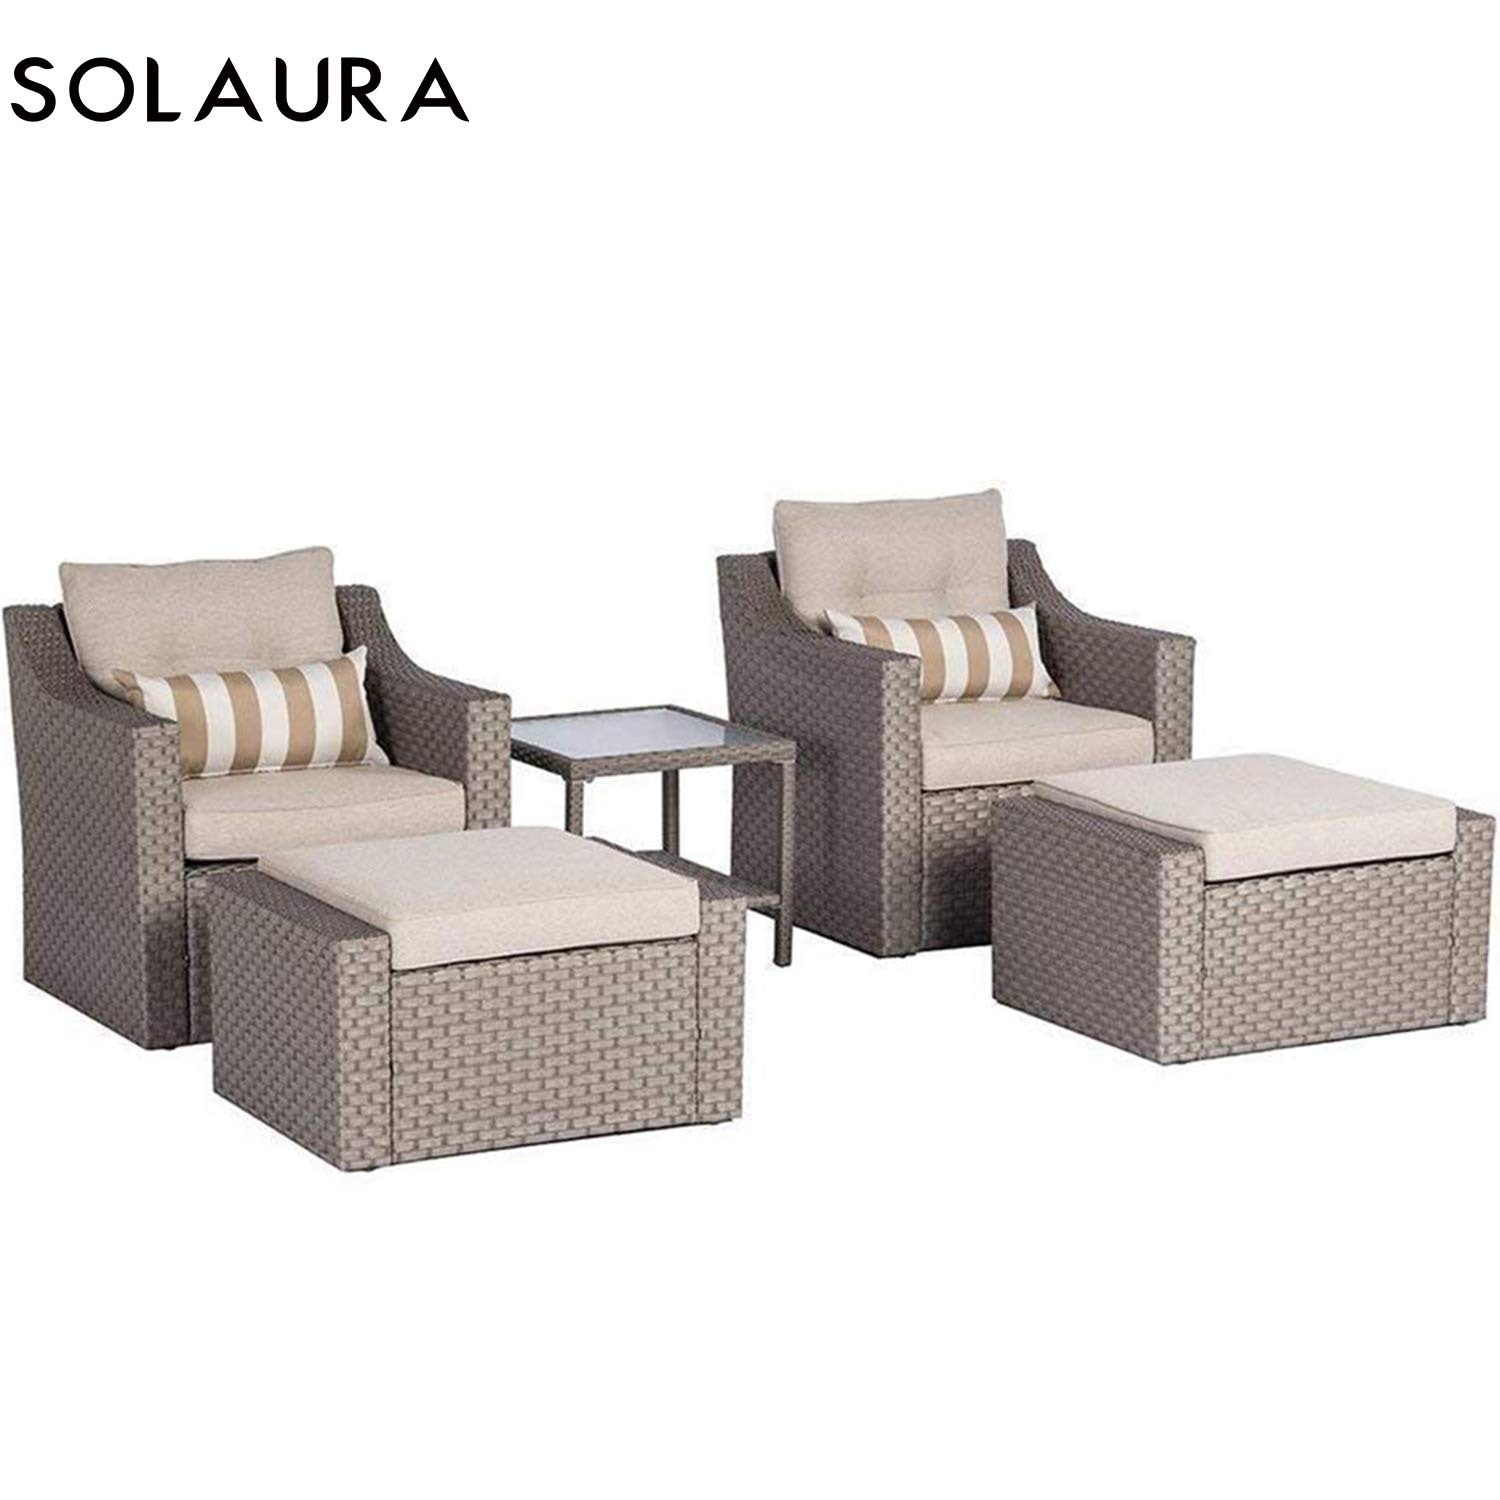 Solaura Sofa Sets 5-Piece Outdoor Furniture Set Brown Wicker Lounge Chair /& Ottoman with Neutral Beige Cushions /& Glass Coffee Side Table Solaura Patio